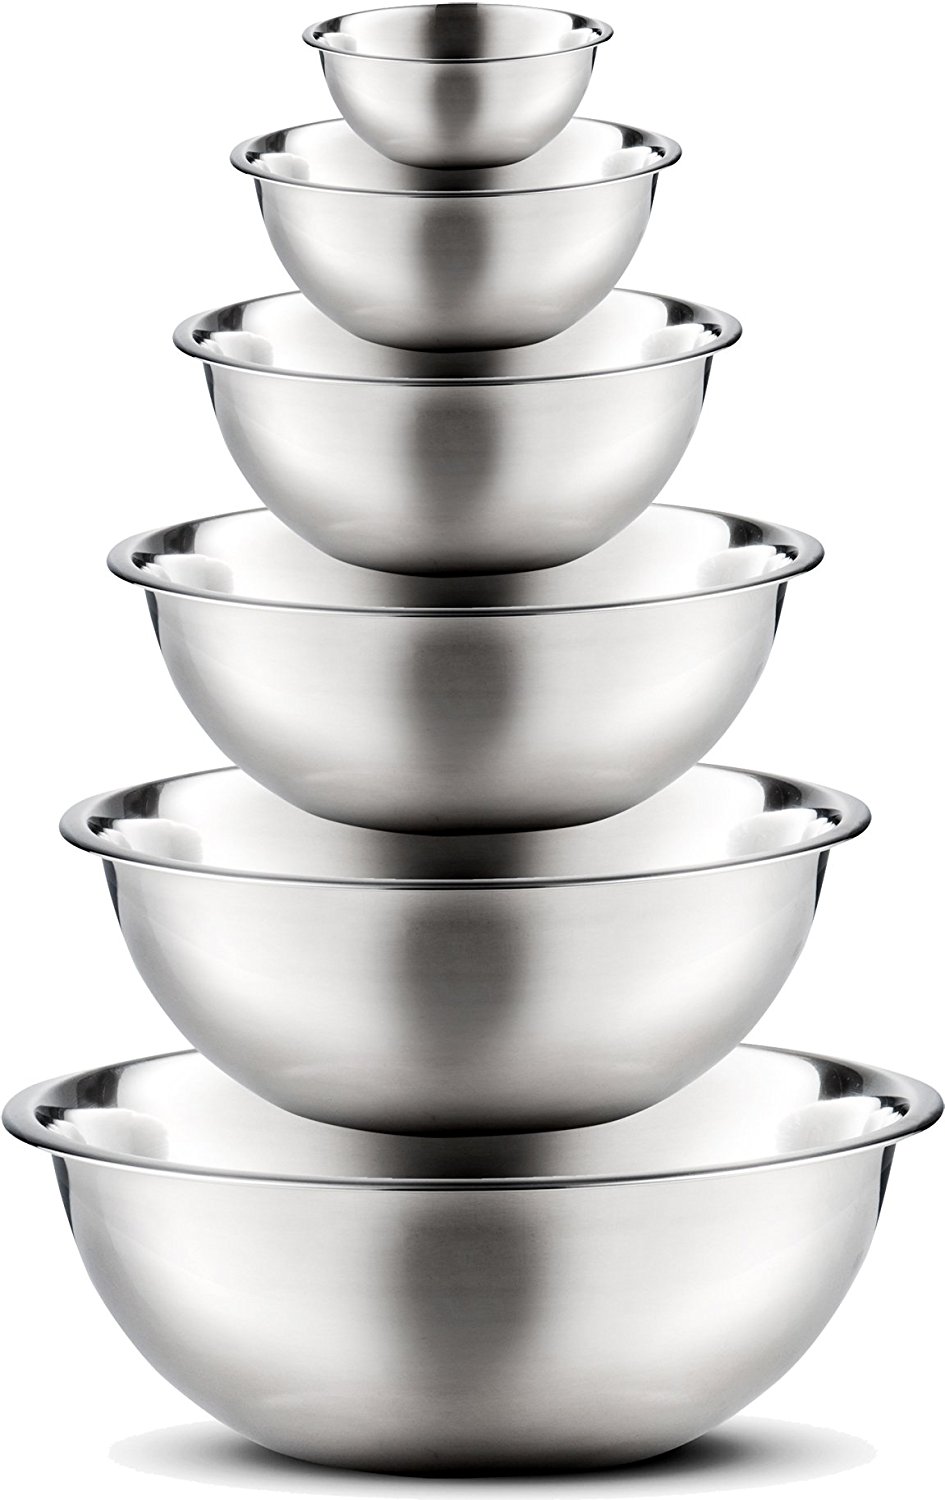 Stainless Steel Mixing Bowls by Finedine – Set of 6 – Just $19.95!